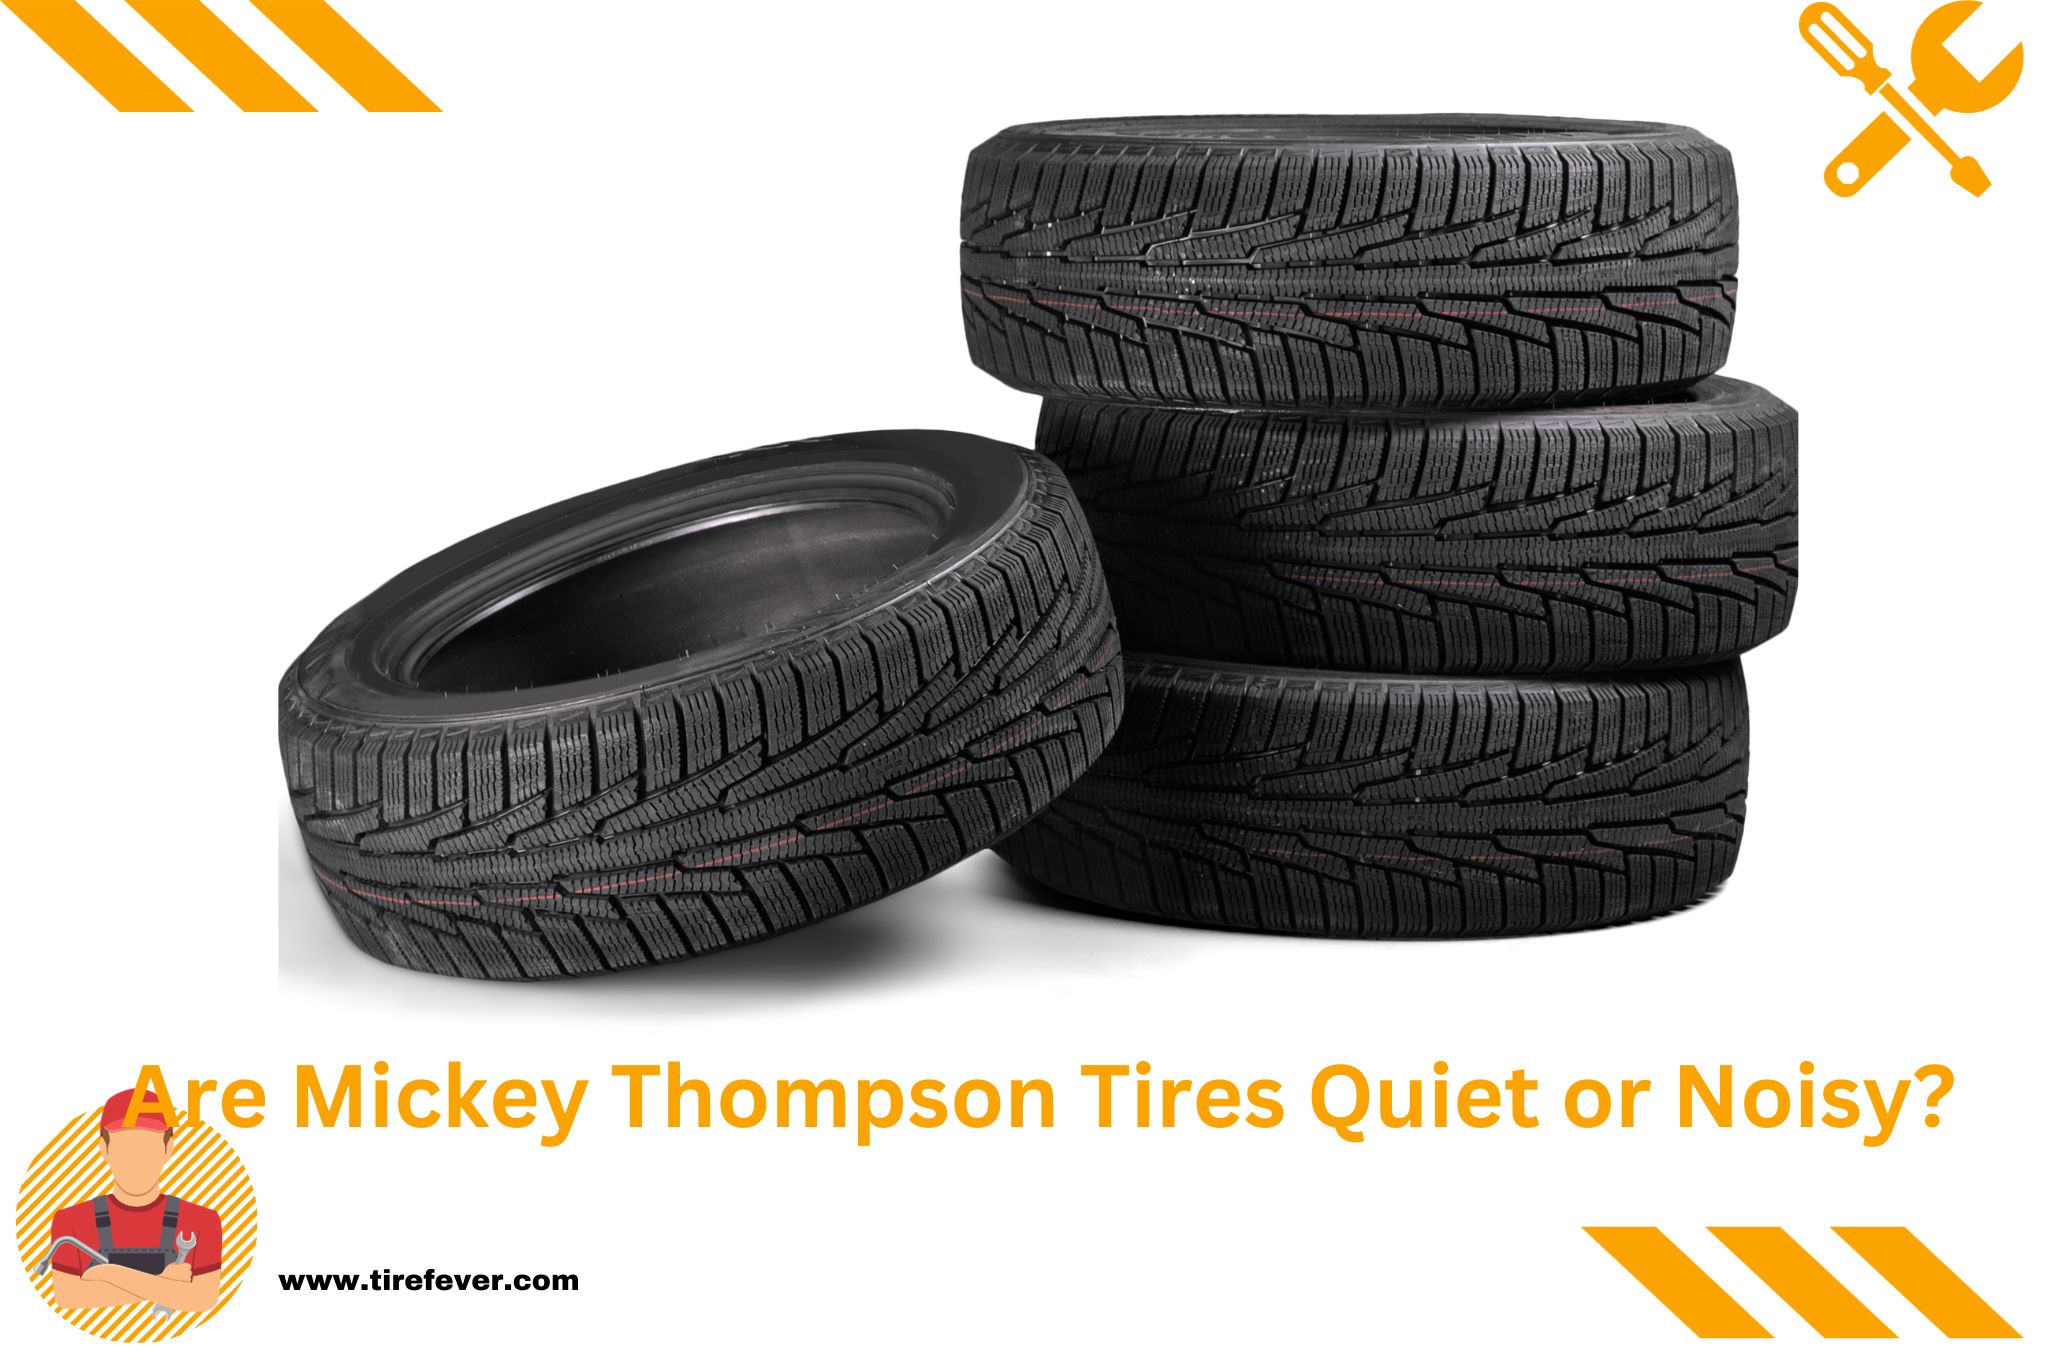 Are Mickey Thompson Tires Quiet or Noisy?